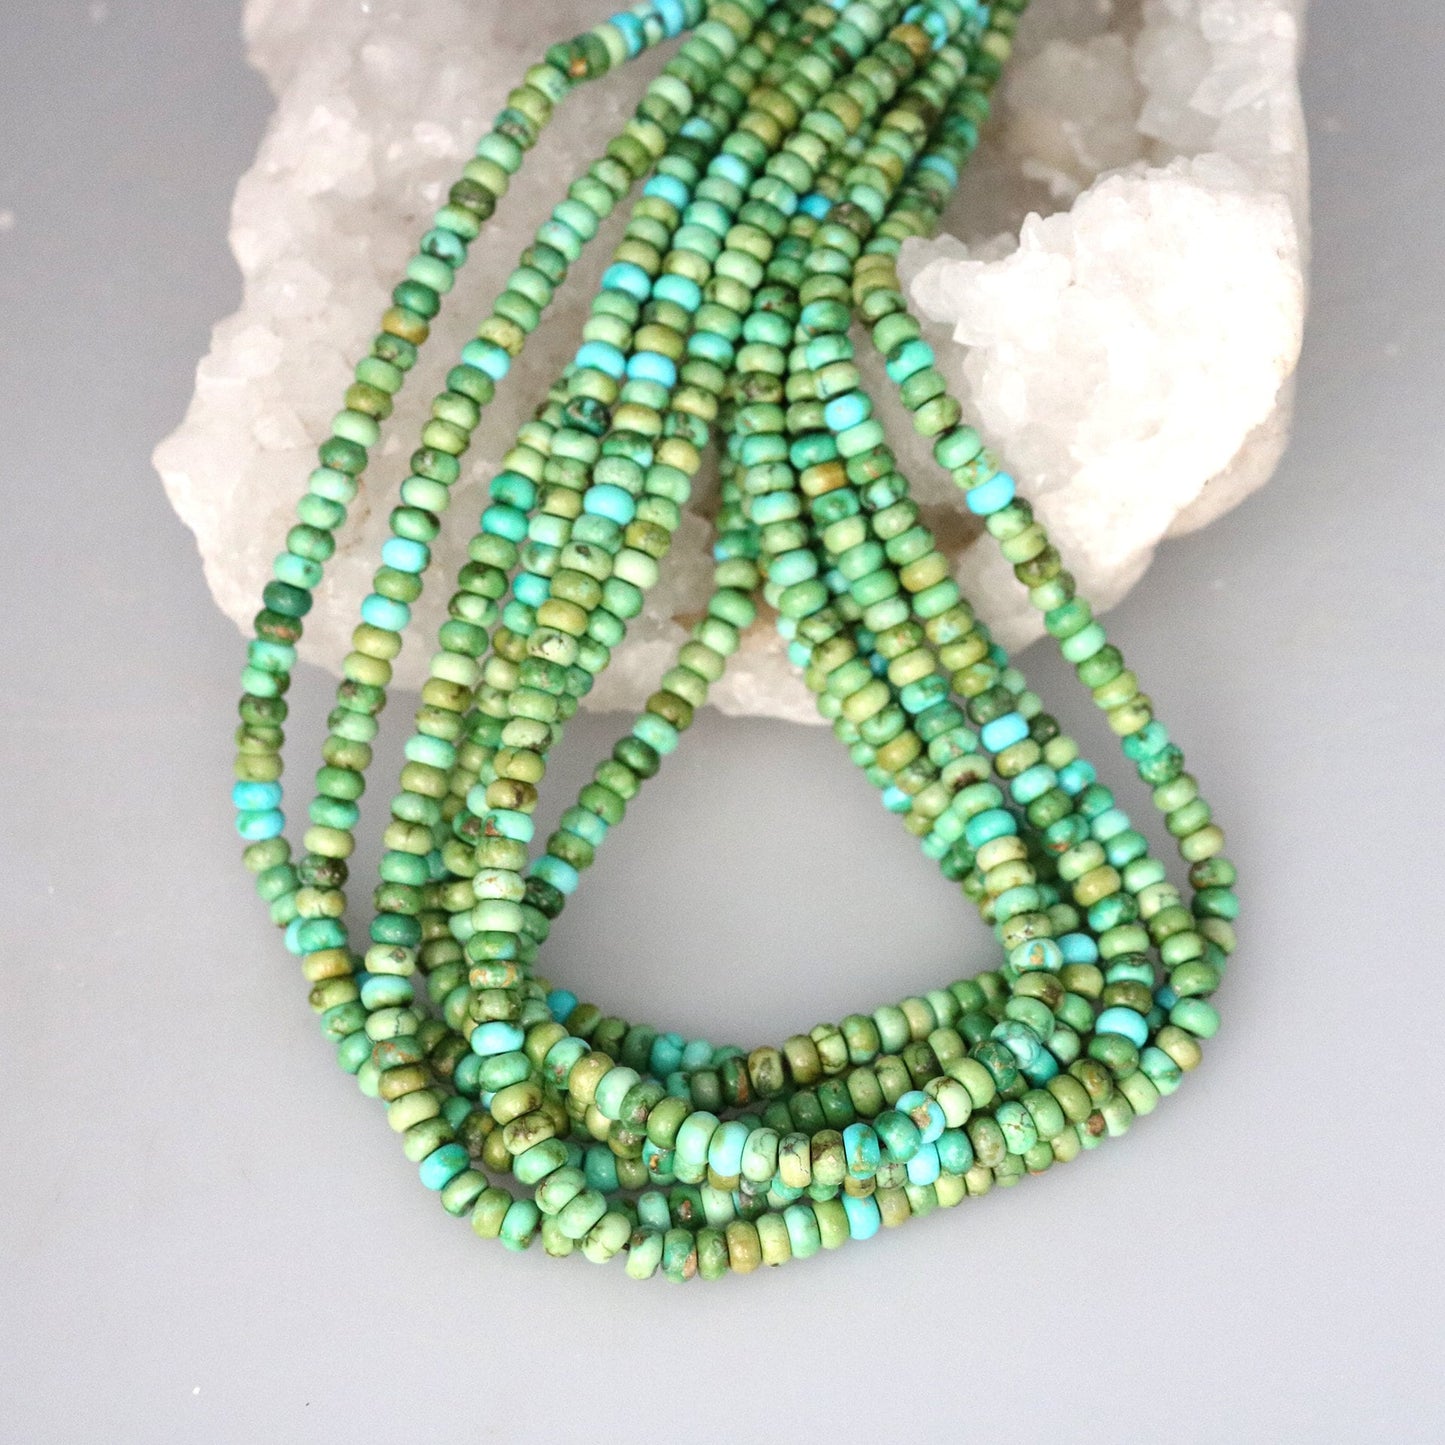 SONORAN GOLD Turquoise Beads Light Lime Green Blue 3mm Rondelles 16"